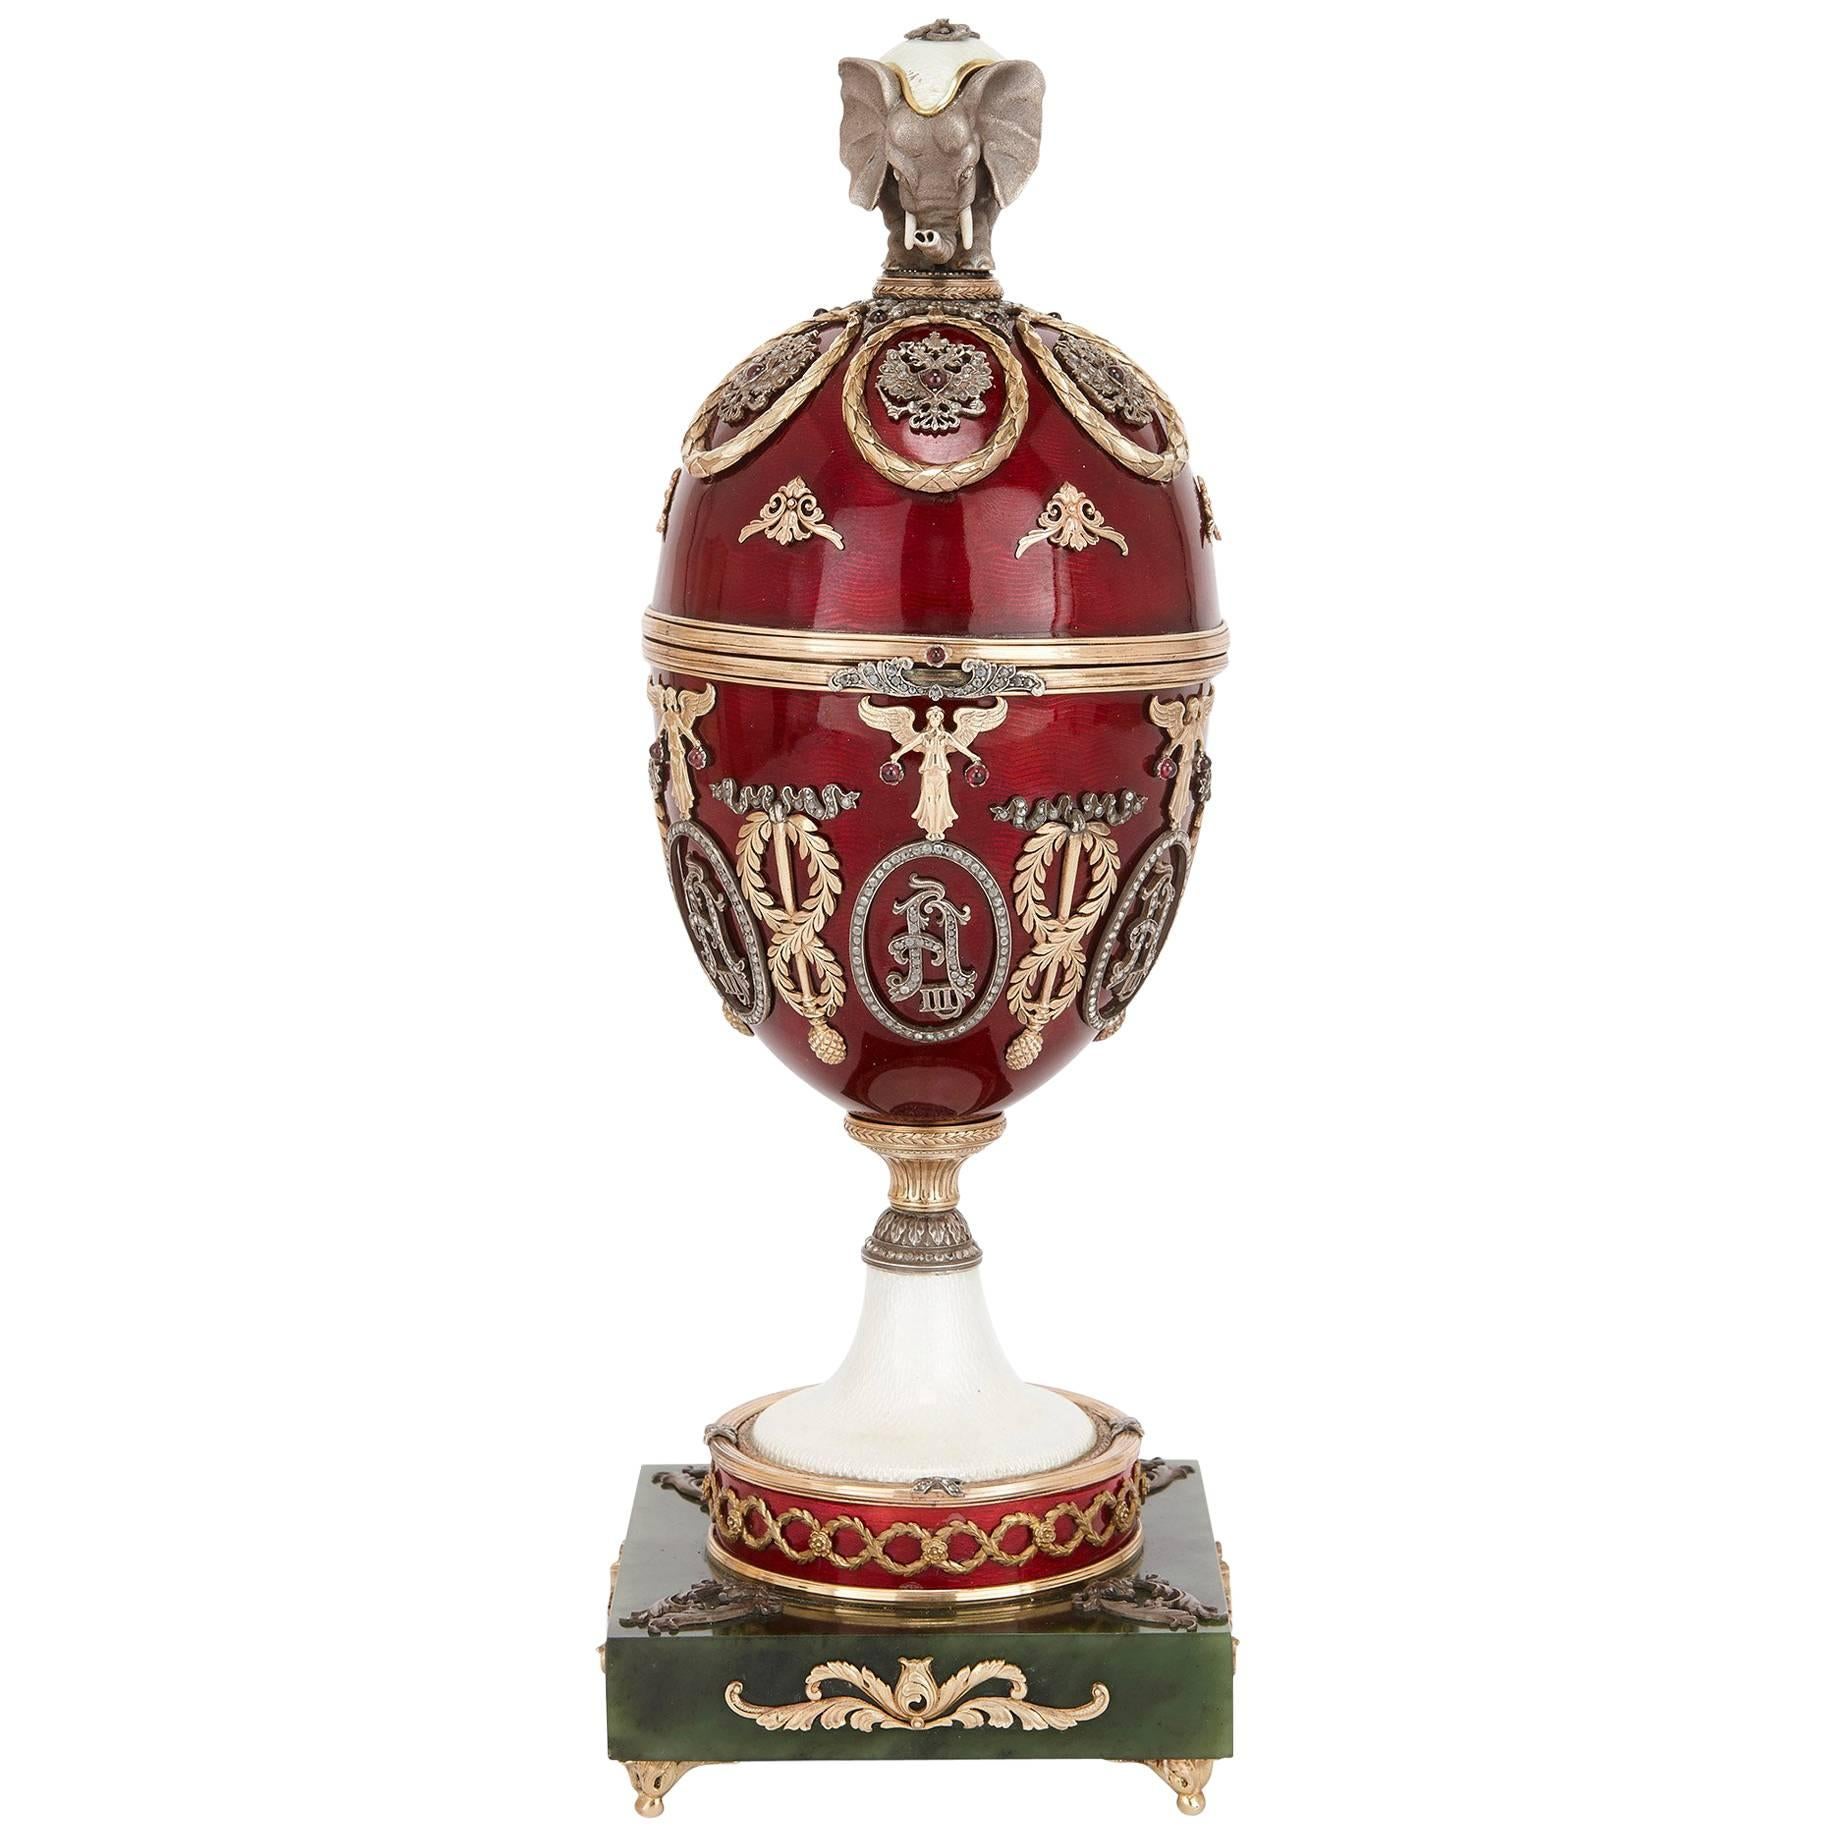 Russian Gold, Diamond, Nephrite and Enameled Egg in the Style of Faberge